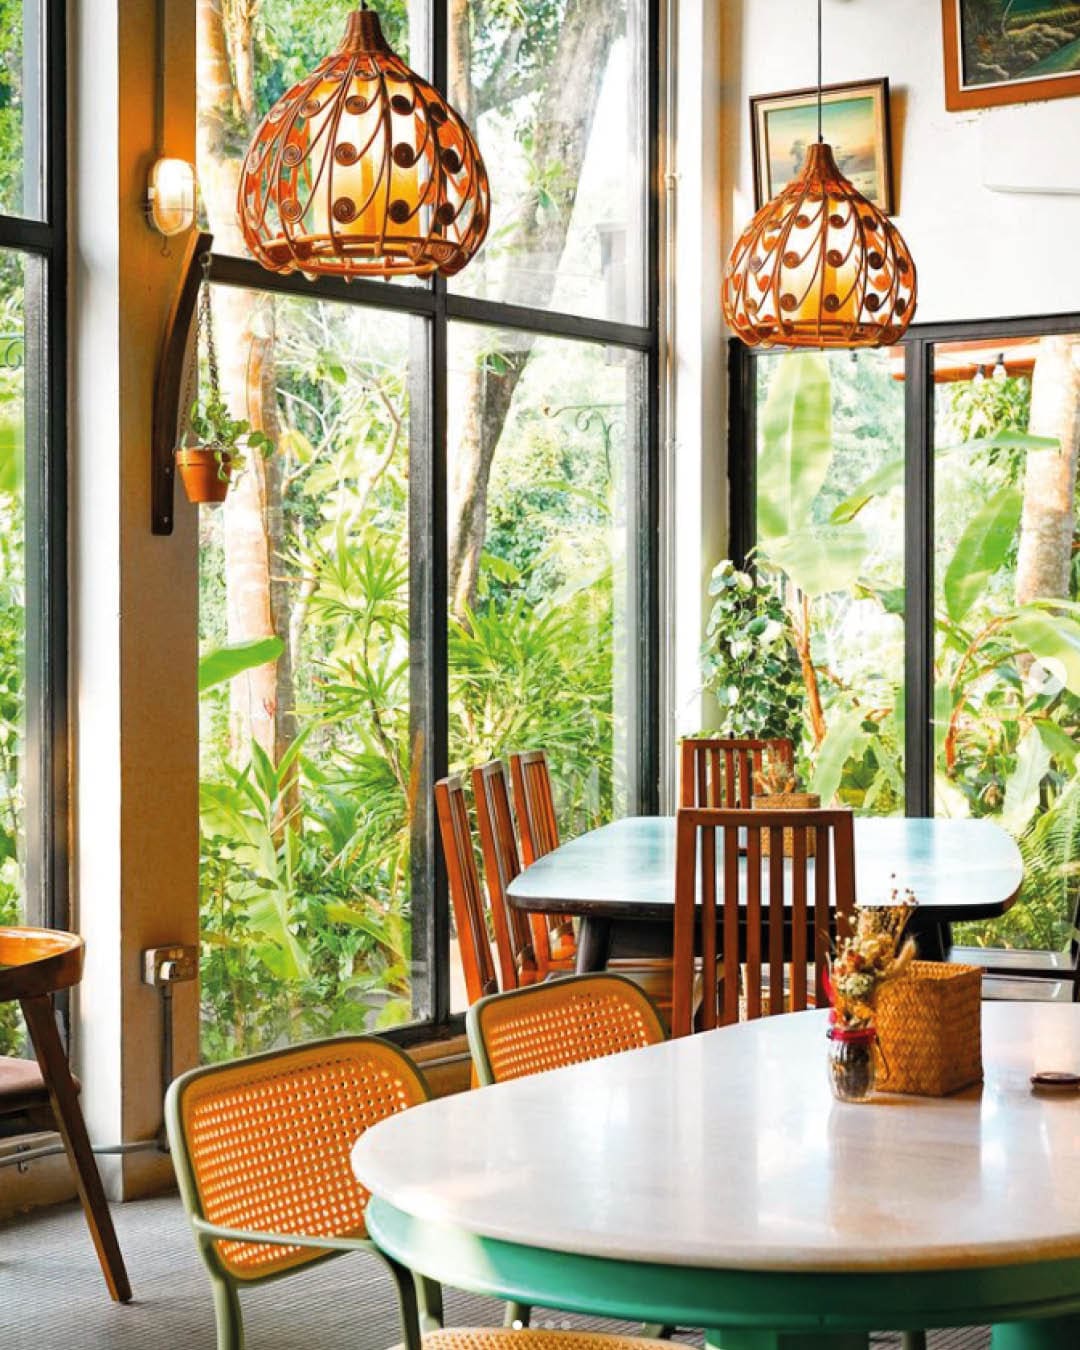 Chairs and tables beneath hanging pendants in front of floor-to-ceiling windows in The Coastal Settlement restaurant, Singapore.